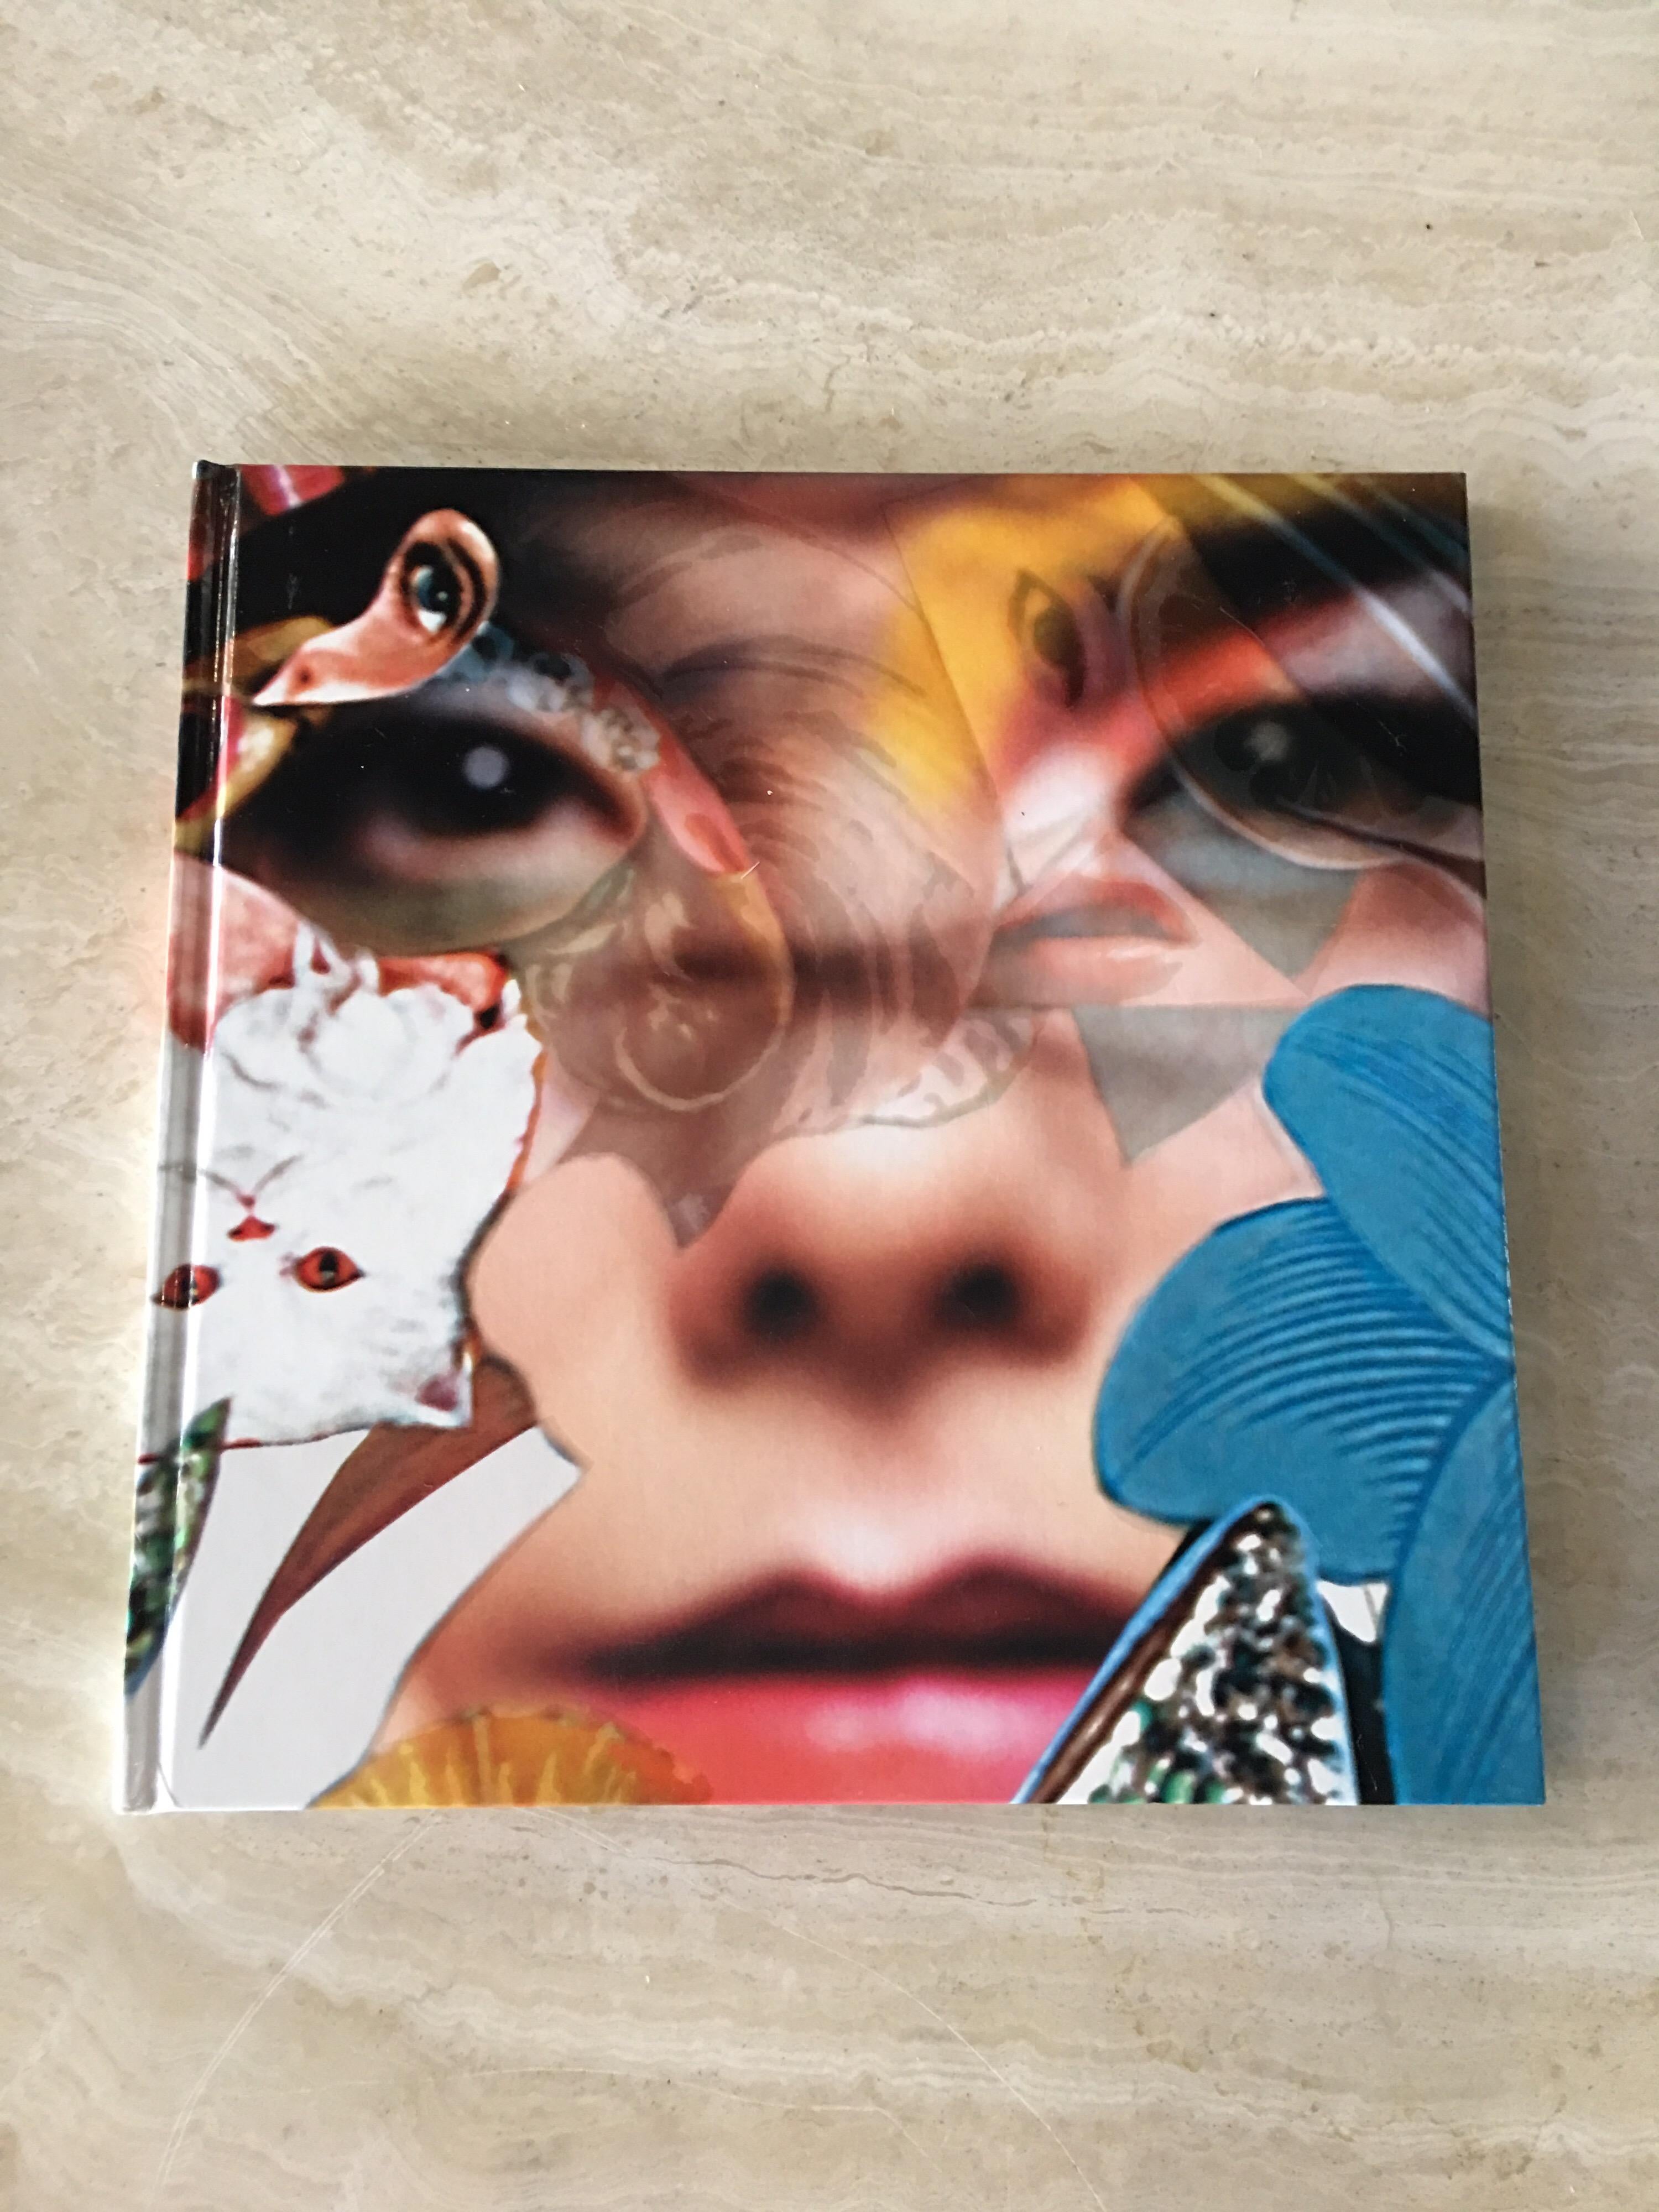 A rare Visionaire number 36 entitled Power. From a collector’s Palm Springs estate. Edition numbered 078 of 5.000 numbered copies.